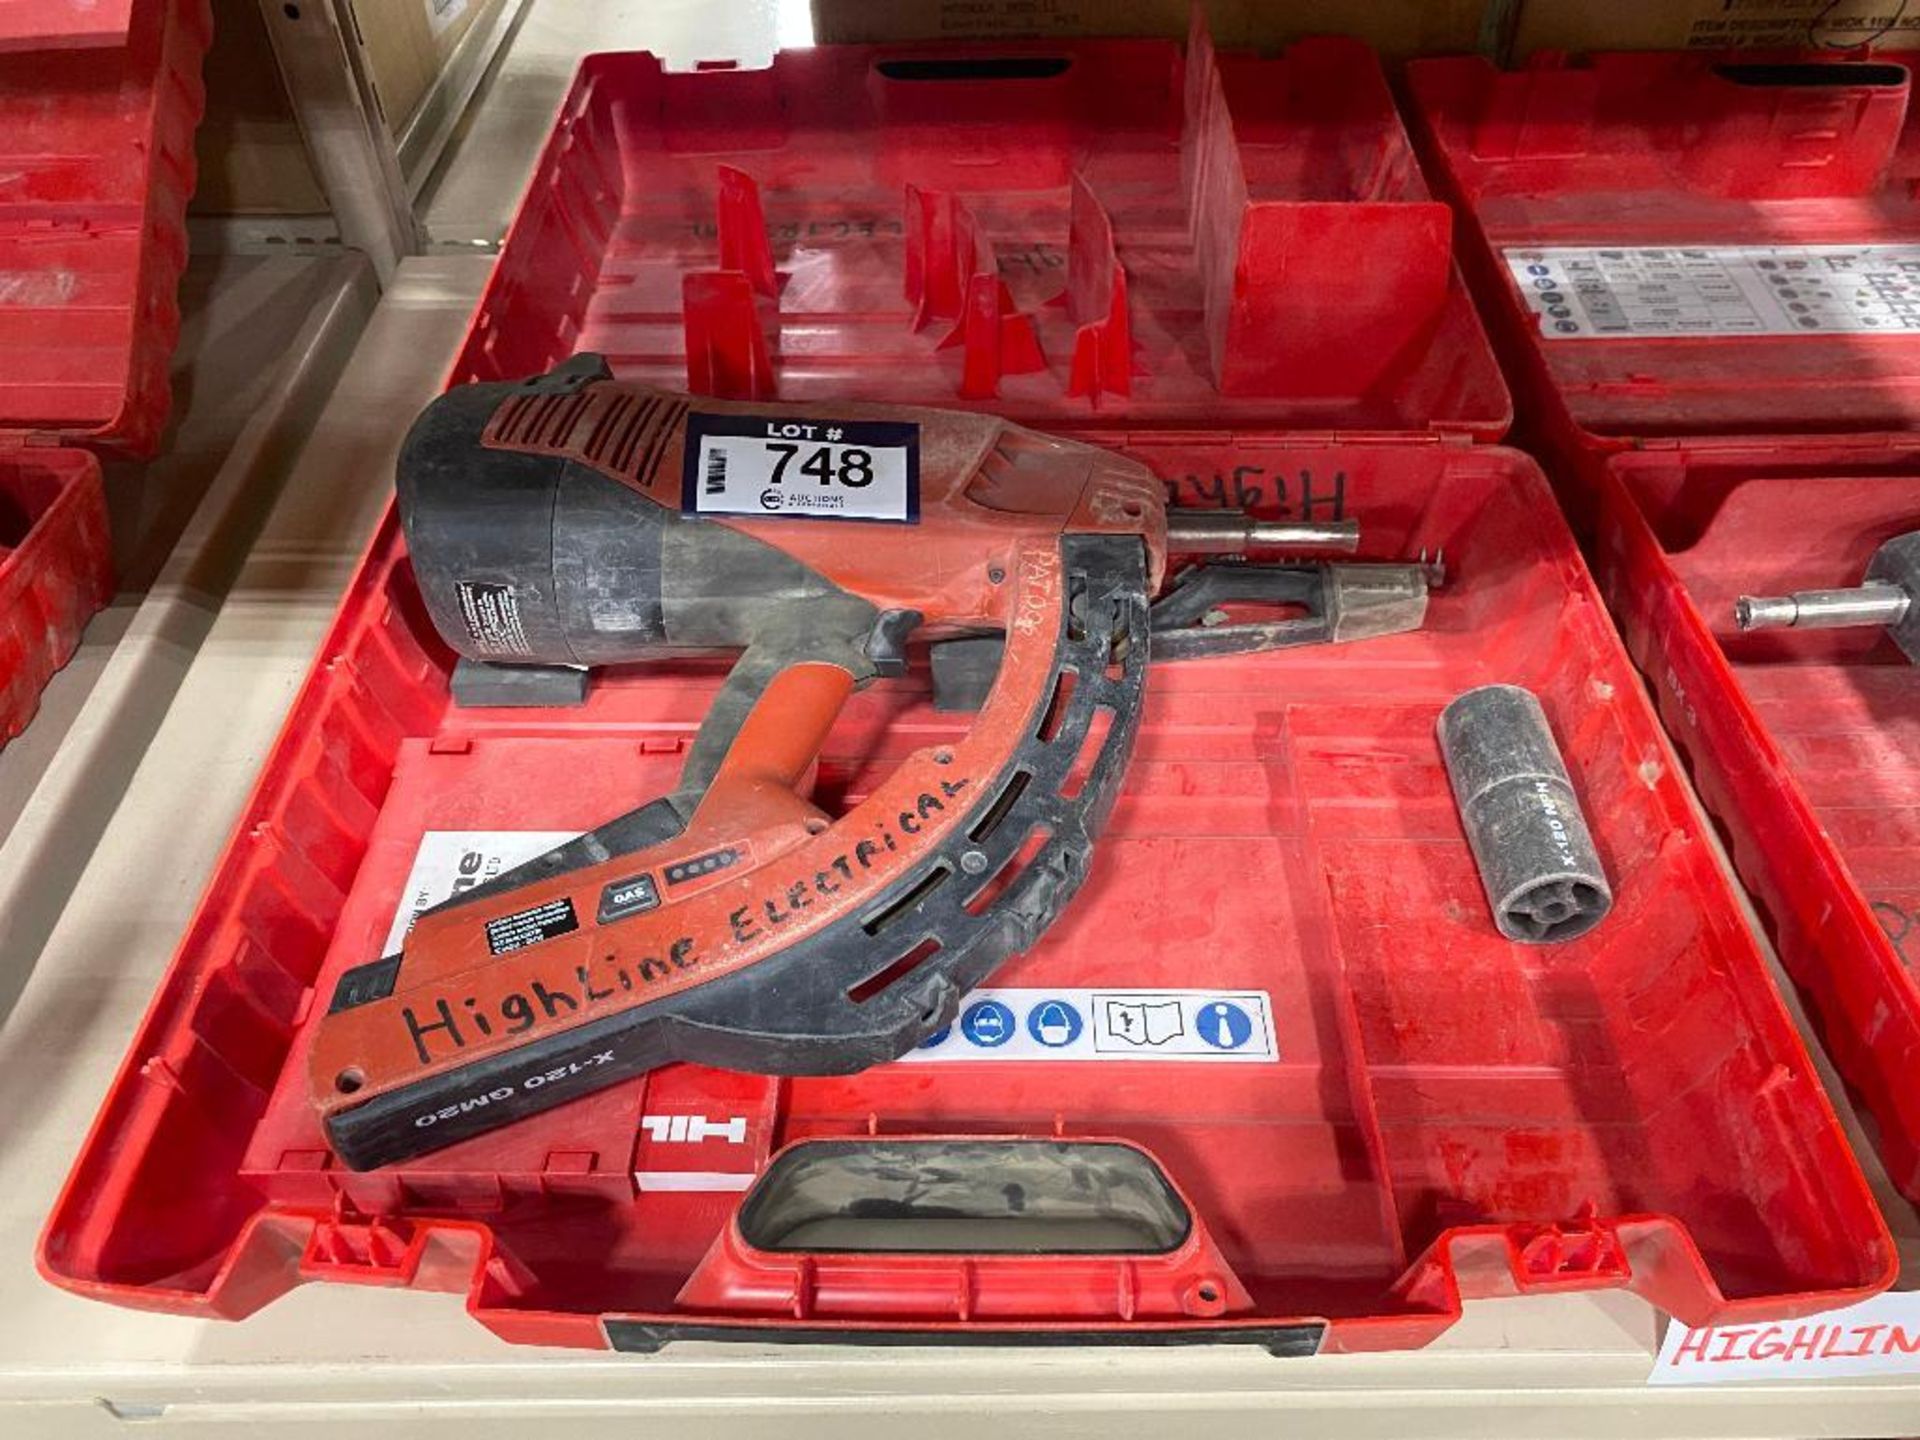 Hilti GX 120-ME Gas Actuated Fastening Tool